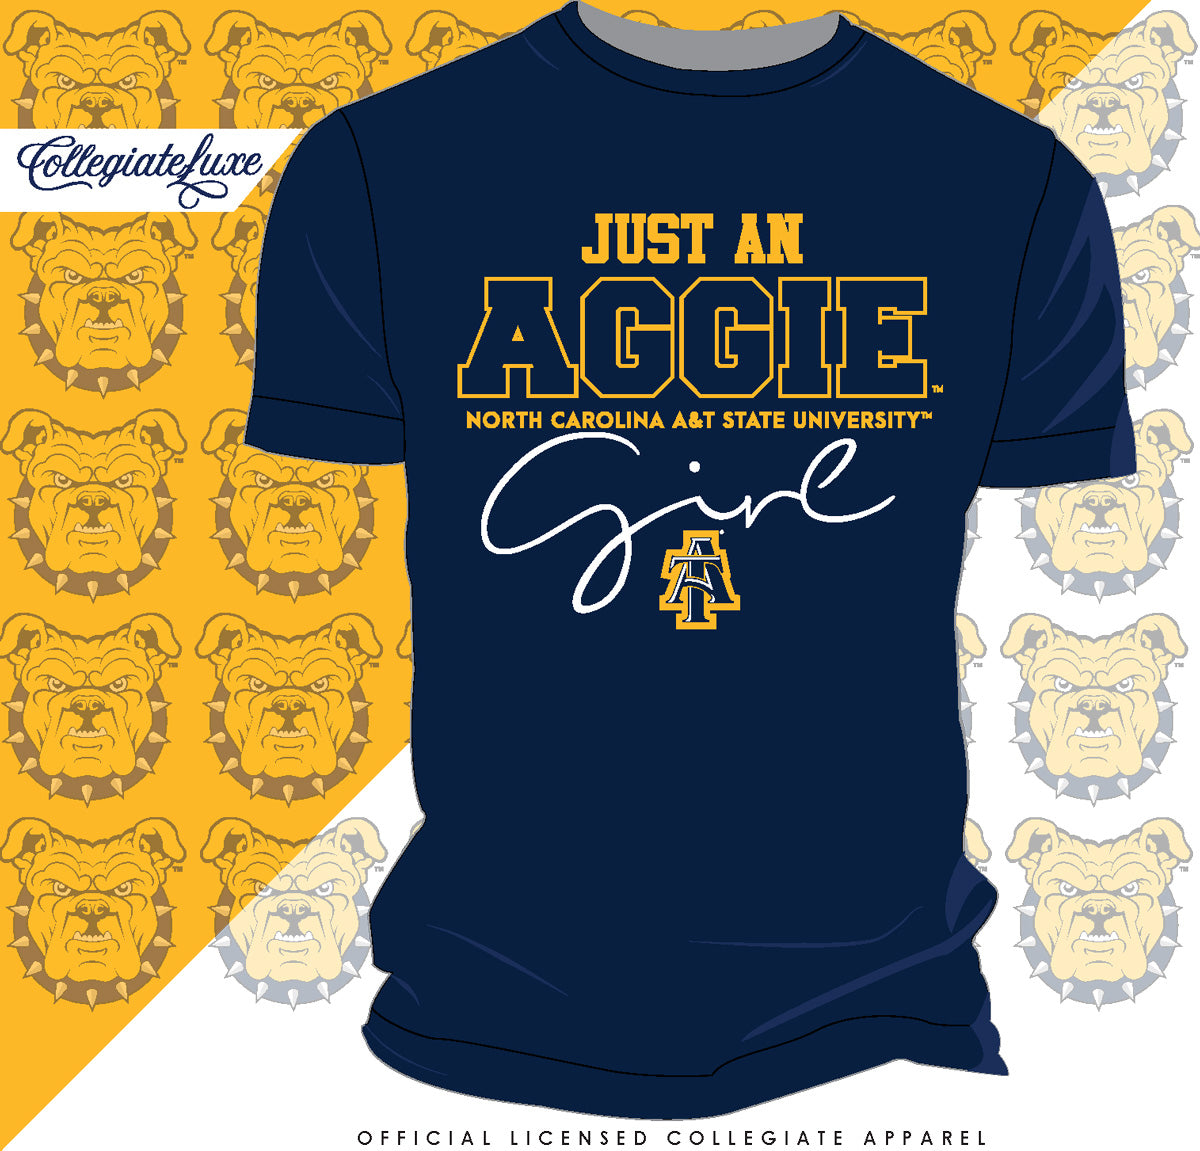 NC A&T SU | Just An Aggie Girl | Navy Unisex Tees (Z)